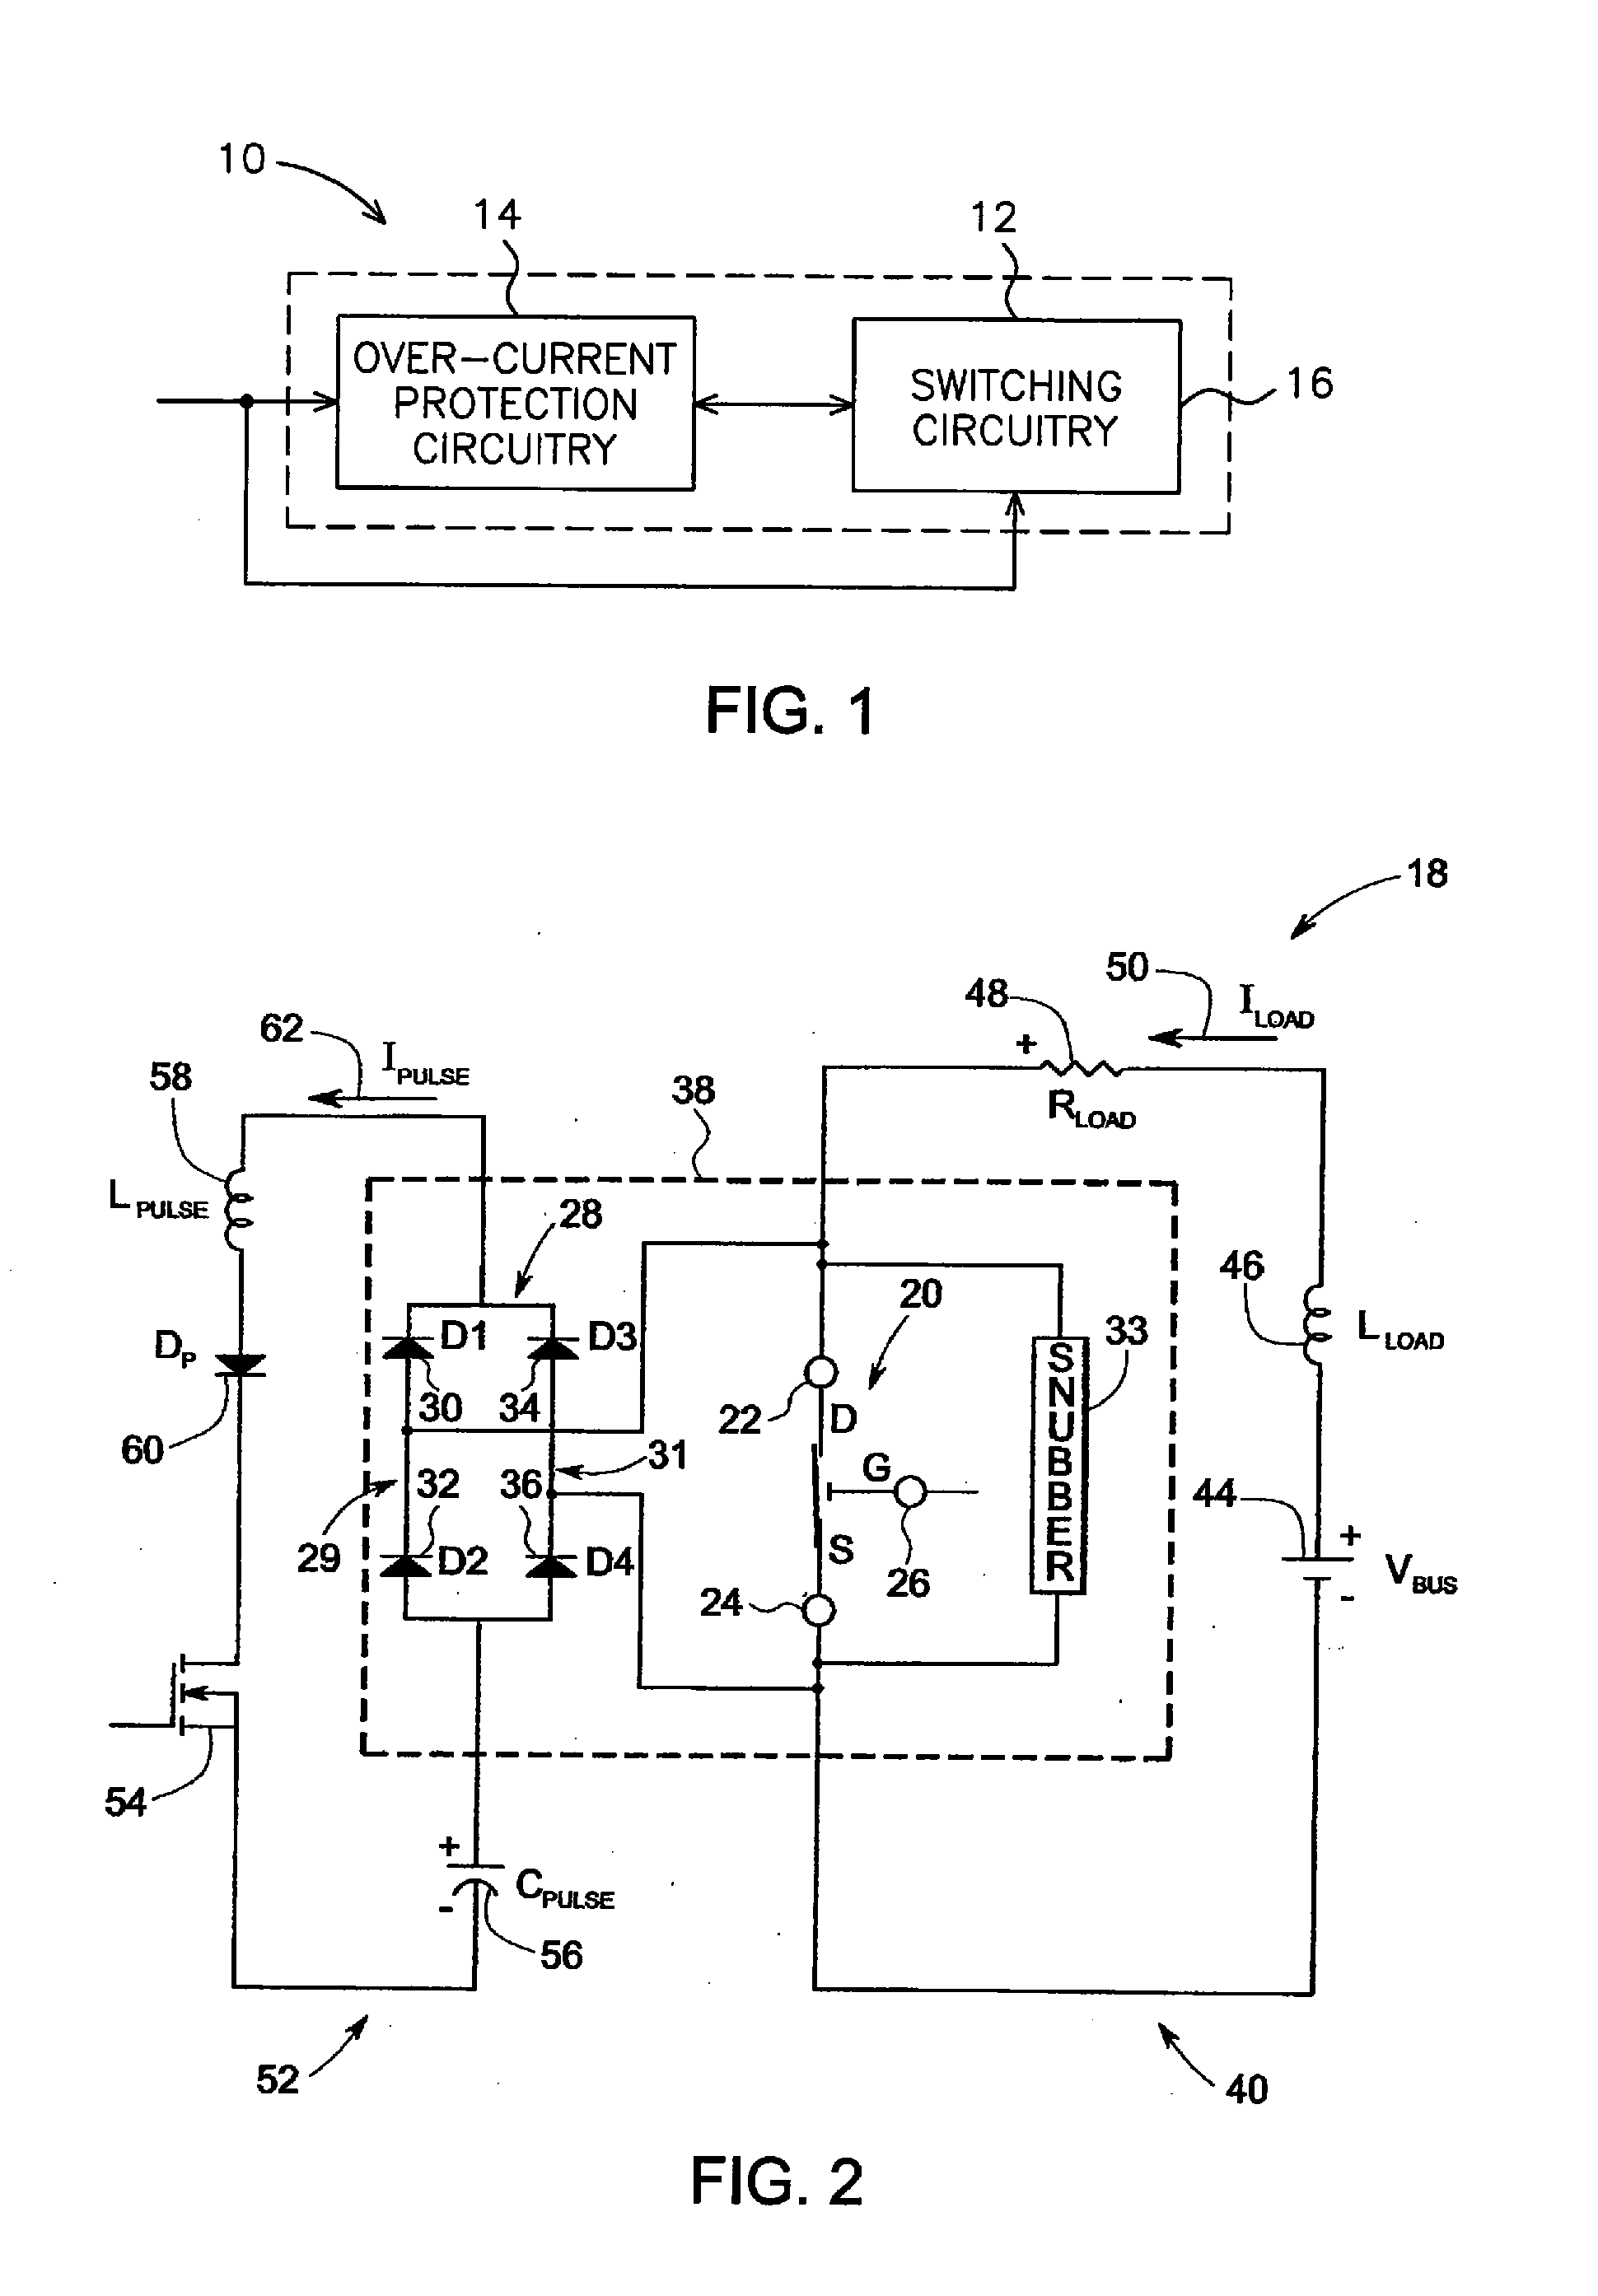 Electromechanical Switching Circuitry In Parallel With Solid State Switching Circuitry Selectively Switchable To Carry A Load Current Appropriate To Such Circuitry